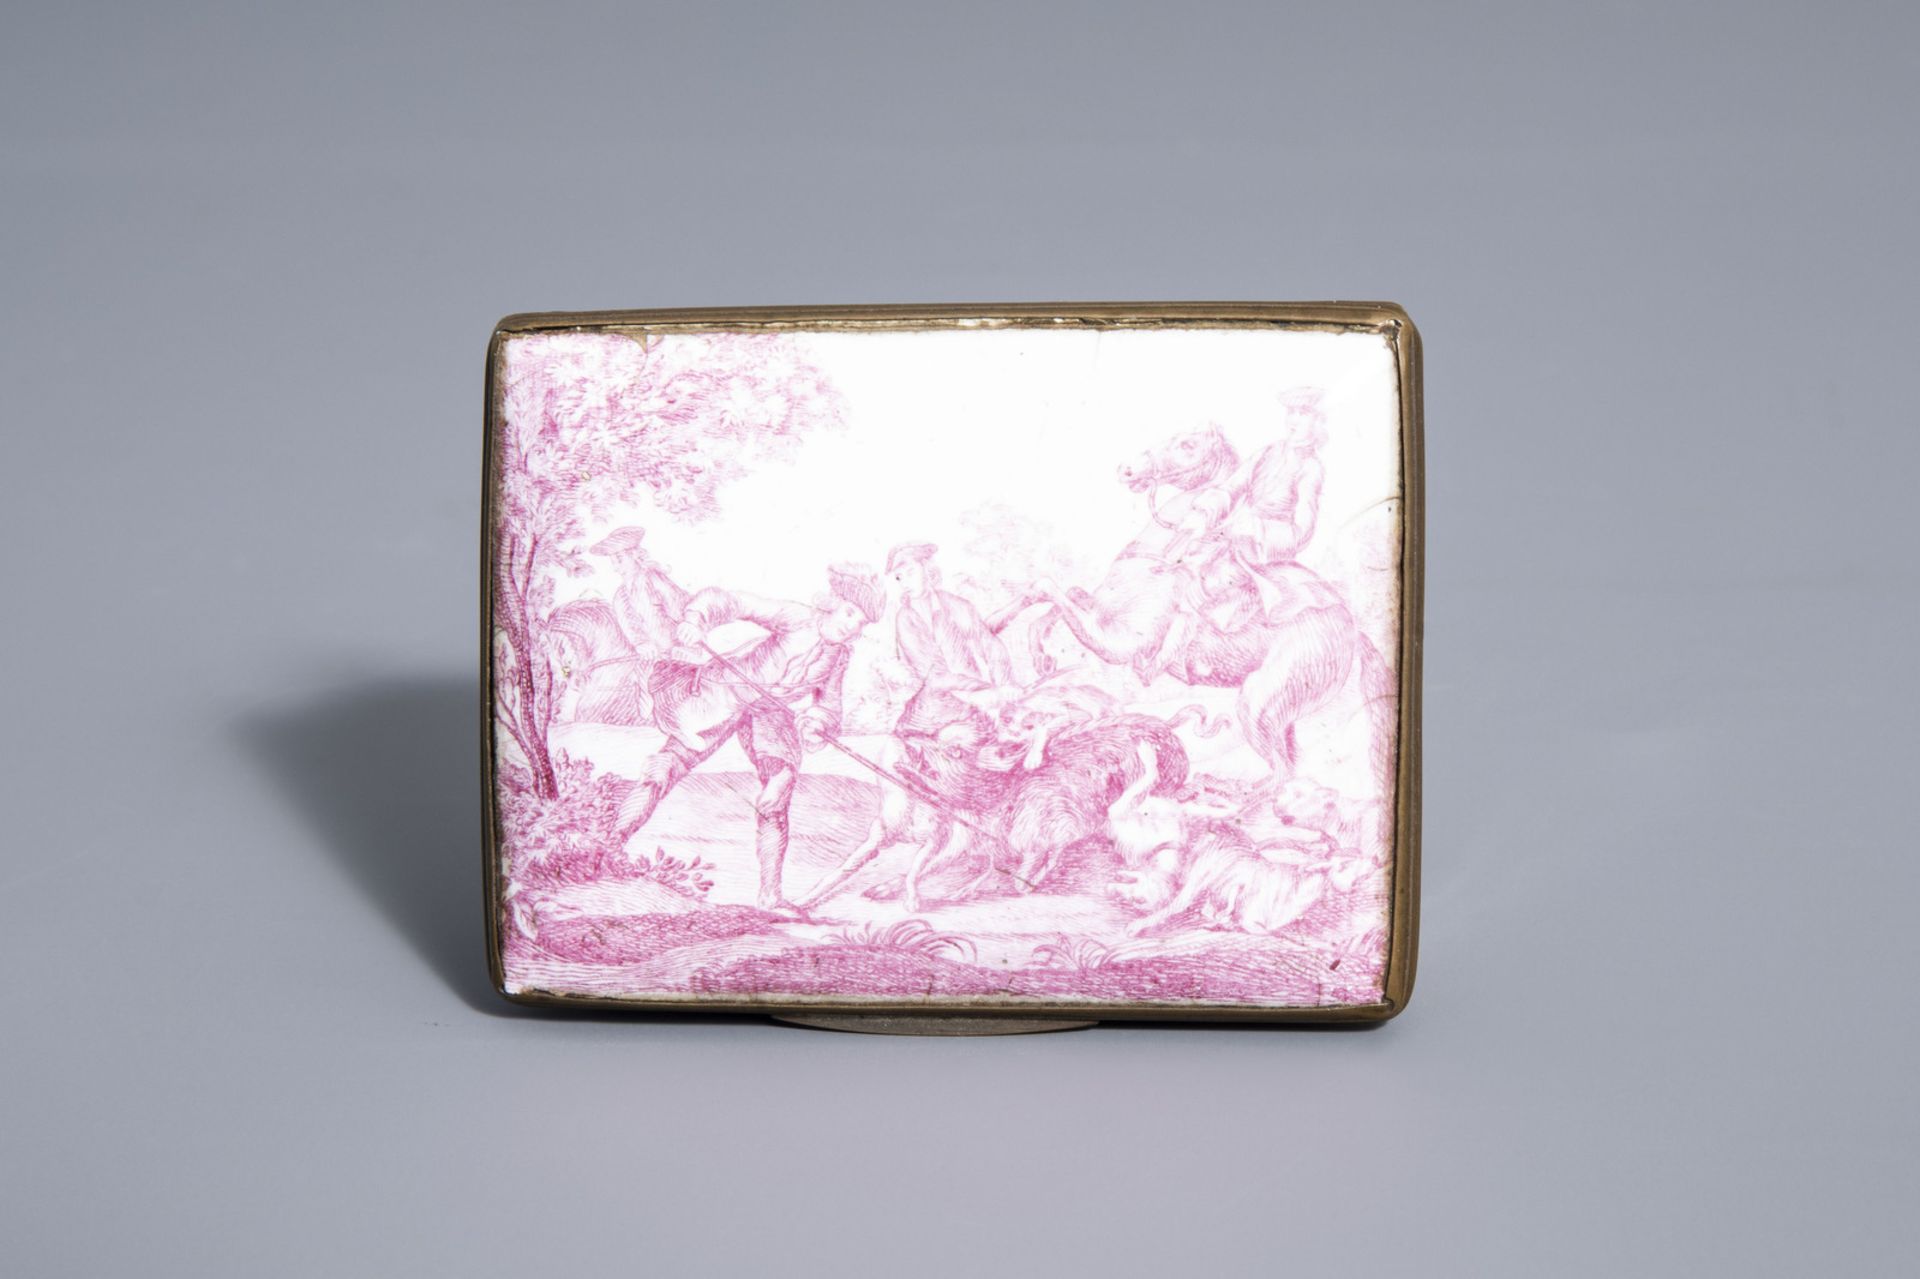 A painted enamel tobacco box, Battersea, England, second half of the 18th C. - Image 8 of 8